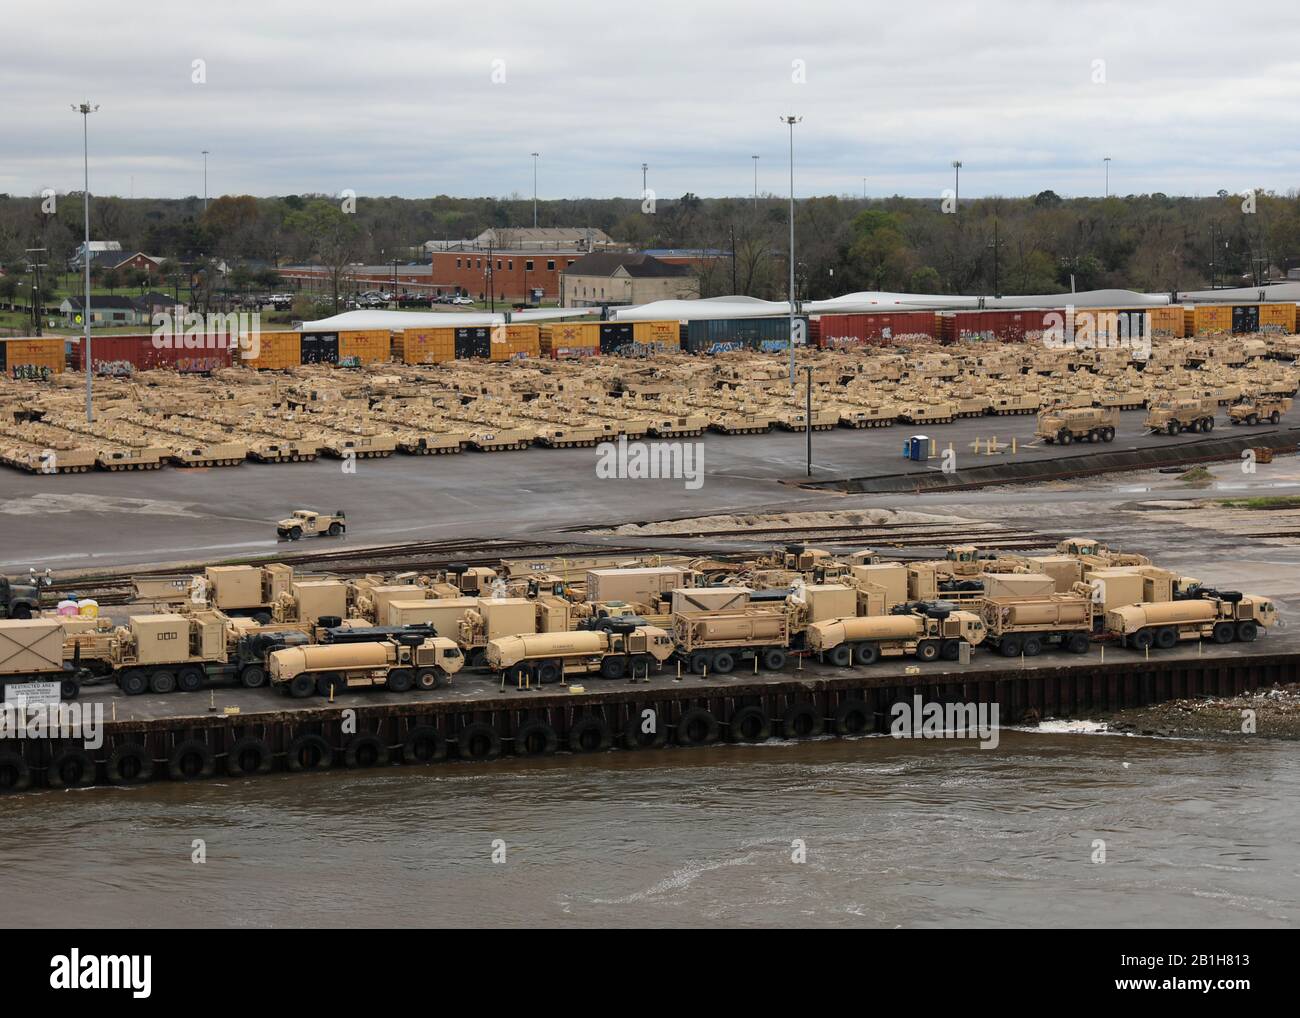 200220-N-OH262-0498 BEAUMONT, TX (February 20, 2020) A view of U.S. Army tanks, self-propelled artillery, armored personnel carriers and support vehicles staged for loading on to Military Sealift Command's large, medium-speed roll on/roll off ship USNS Benavidez (T-AKR 306), and the MSC chartered vehicle carrier MV Resolve, pier-side, at the Port of Beaumont, Texas, Feb. 20. The on-load of USNS Benavidez and MV Resolve was carried out in support of DEFENDER-Europe 2020. (U.S. Navy photo by Bill Mesta/released) Stock Photo